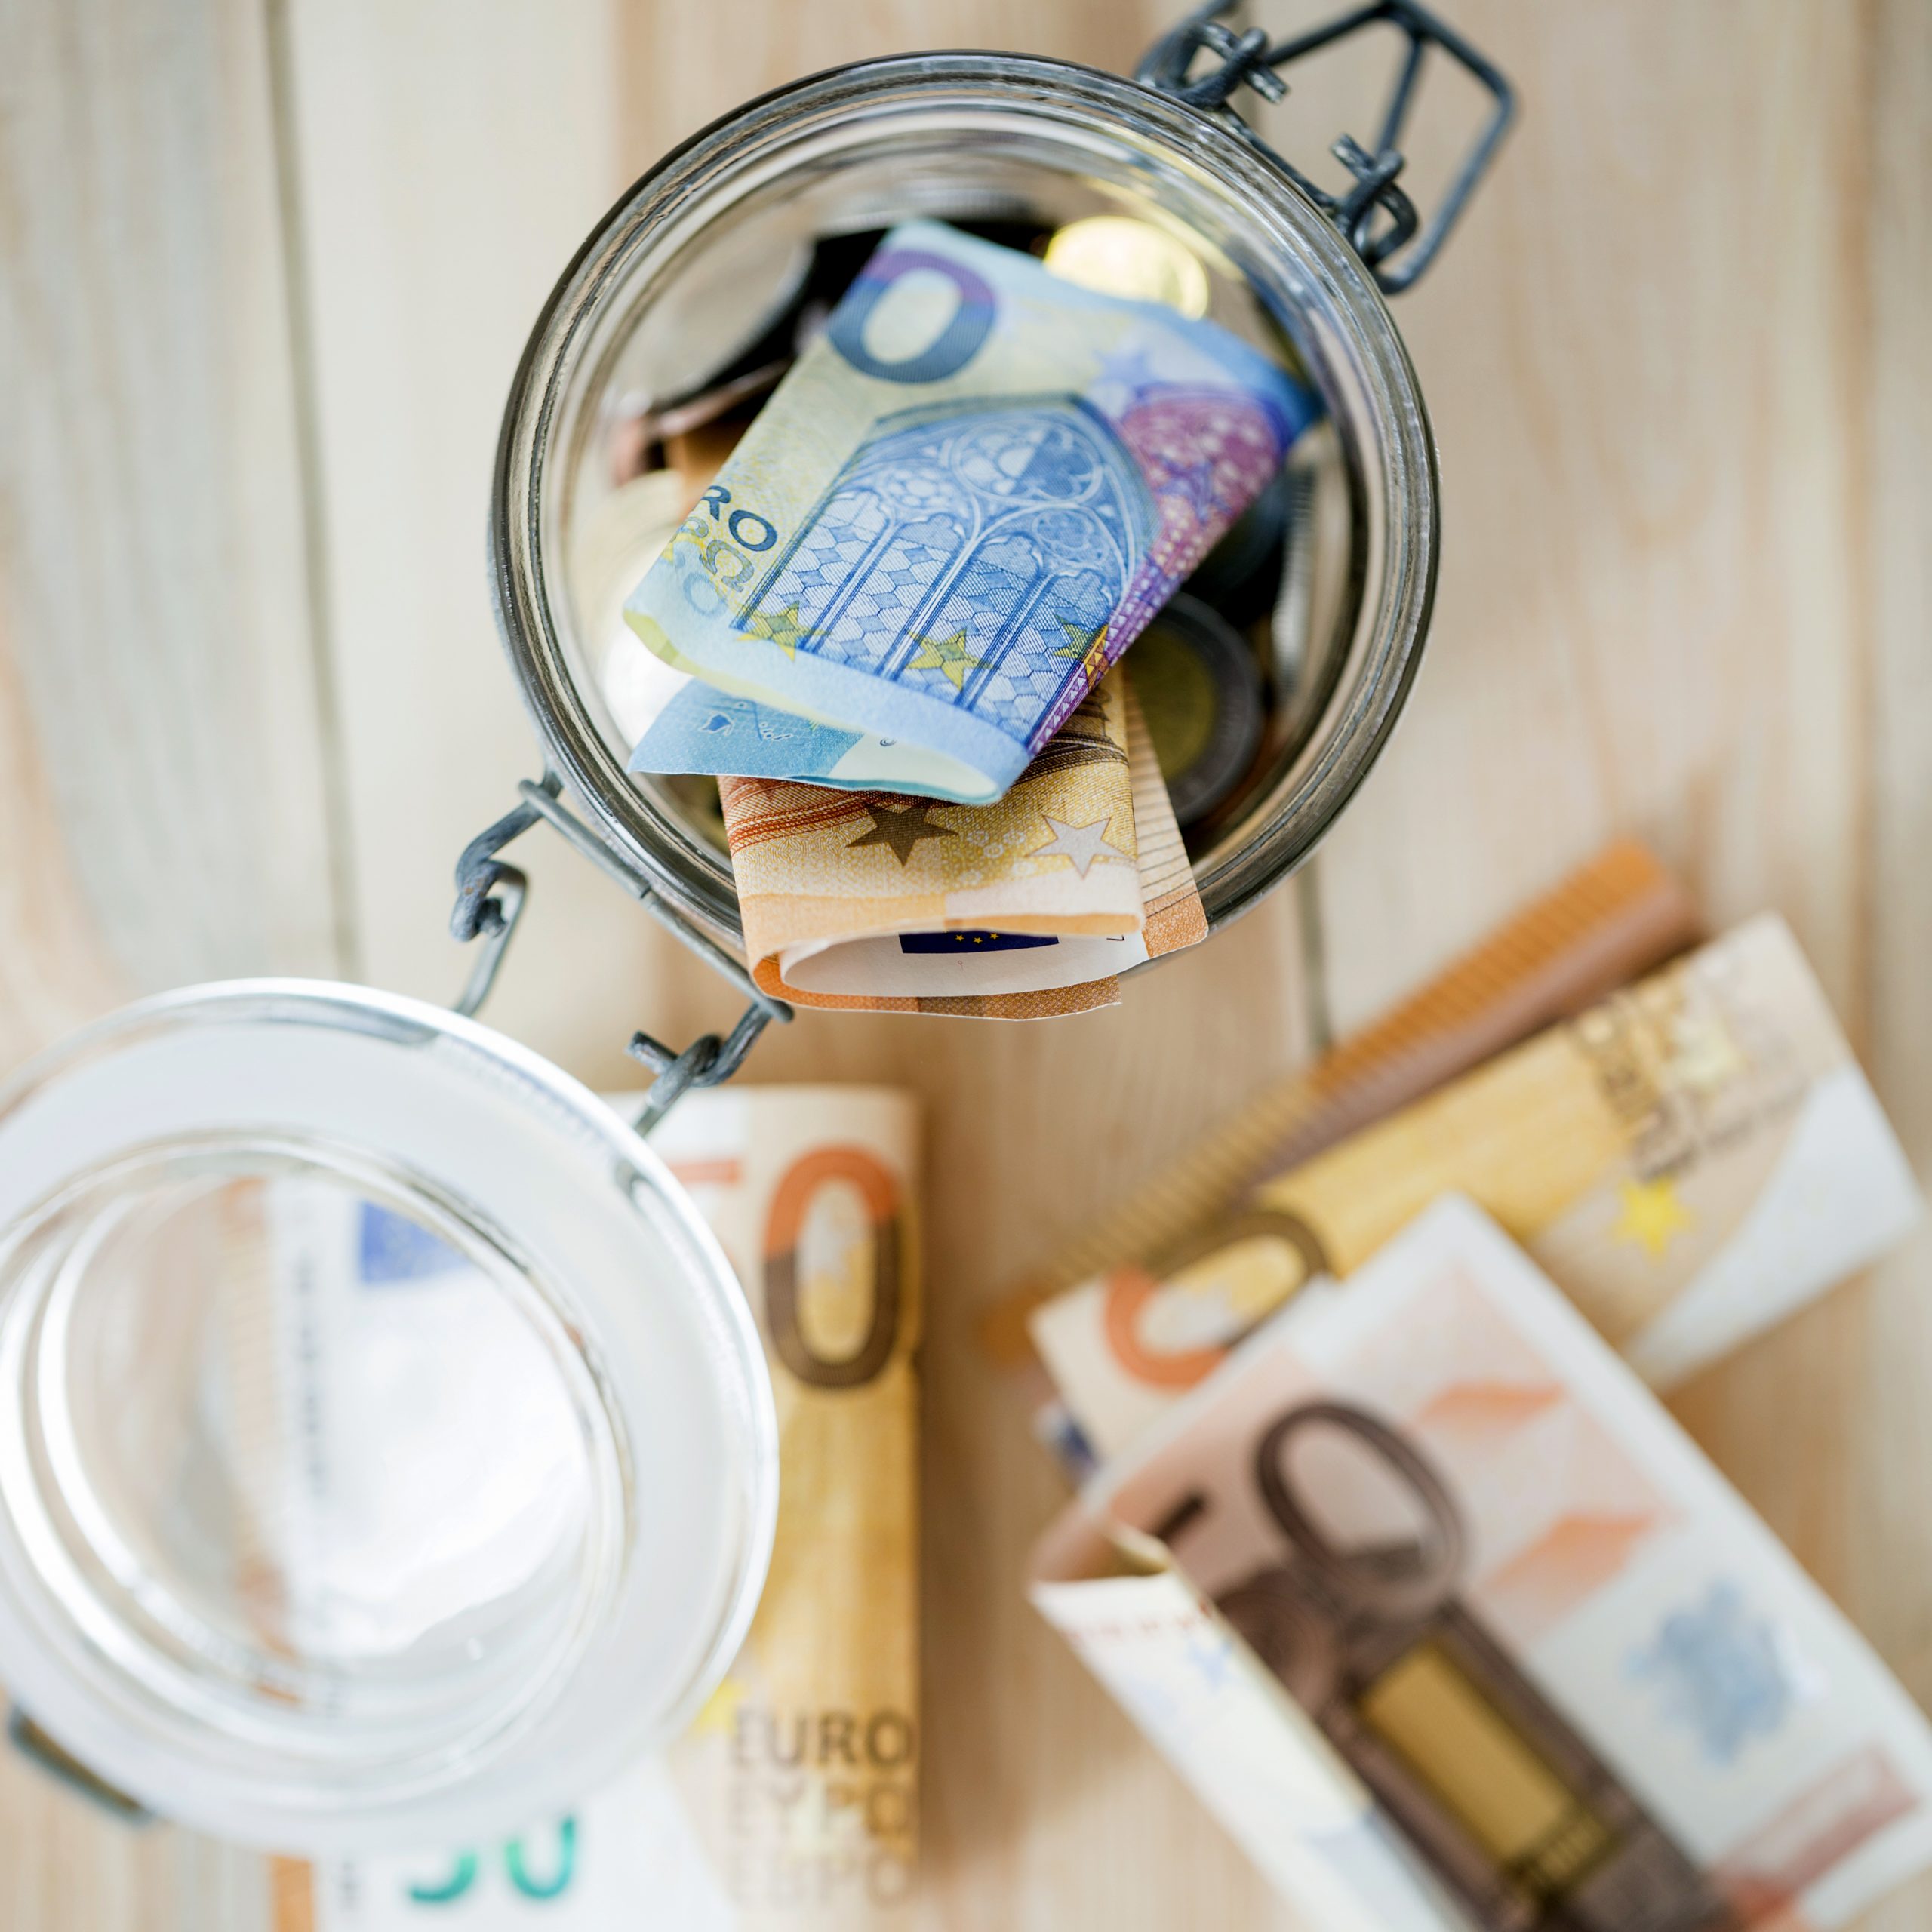 overhead-view-euro-banknotes-open-glass-jar